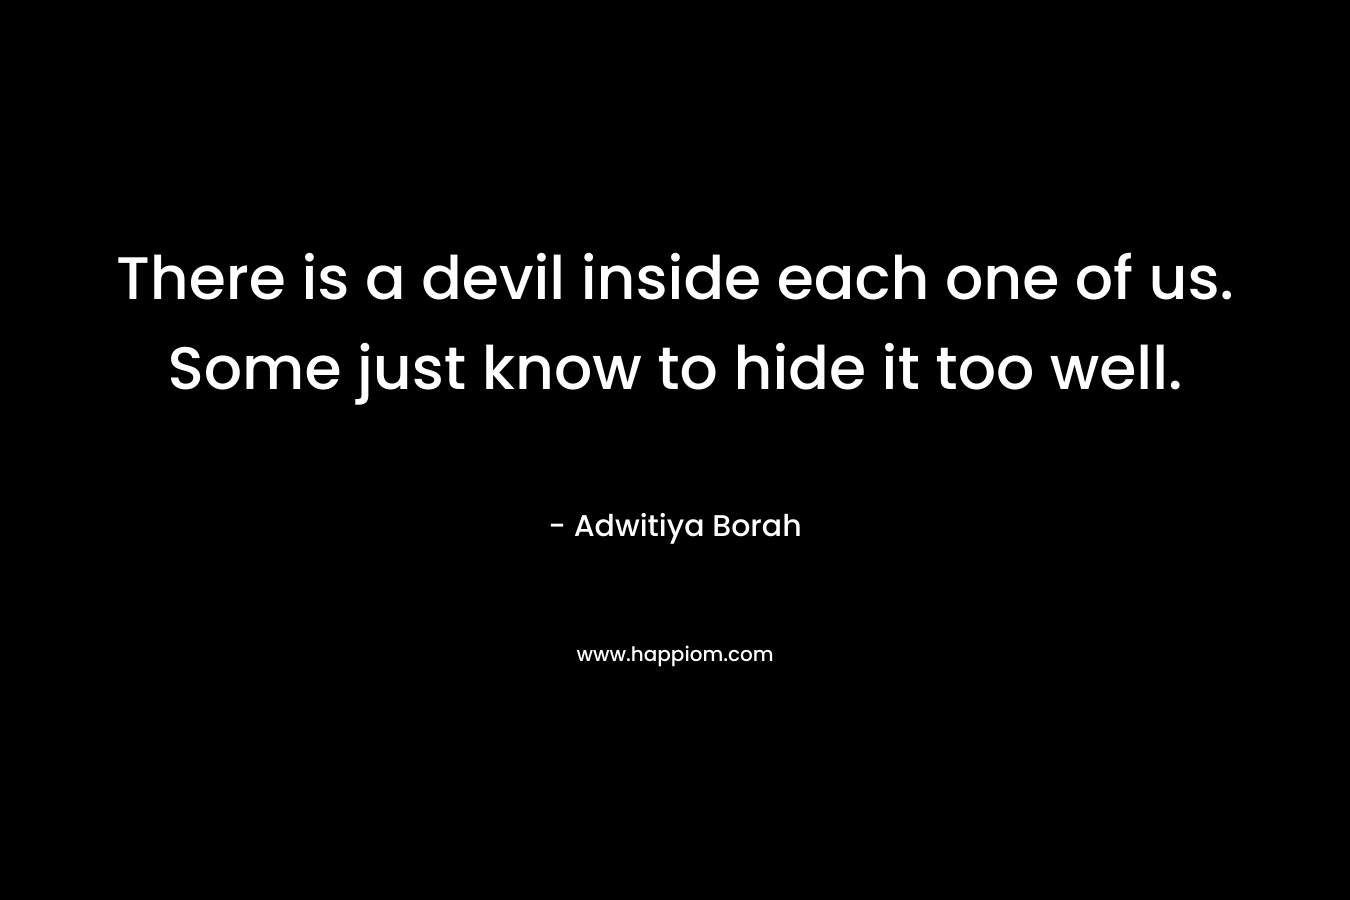 There is a devil inside each one of us. Some just know to hide it too well.